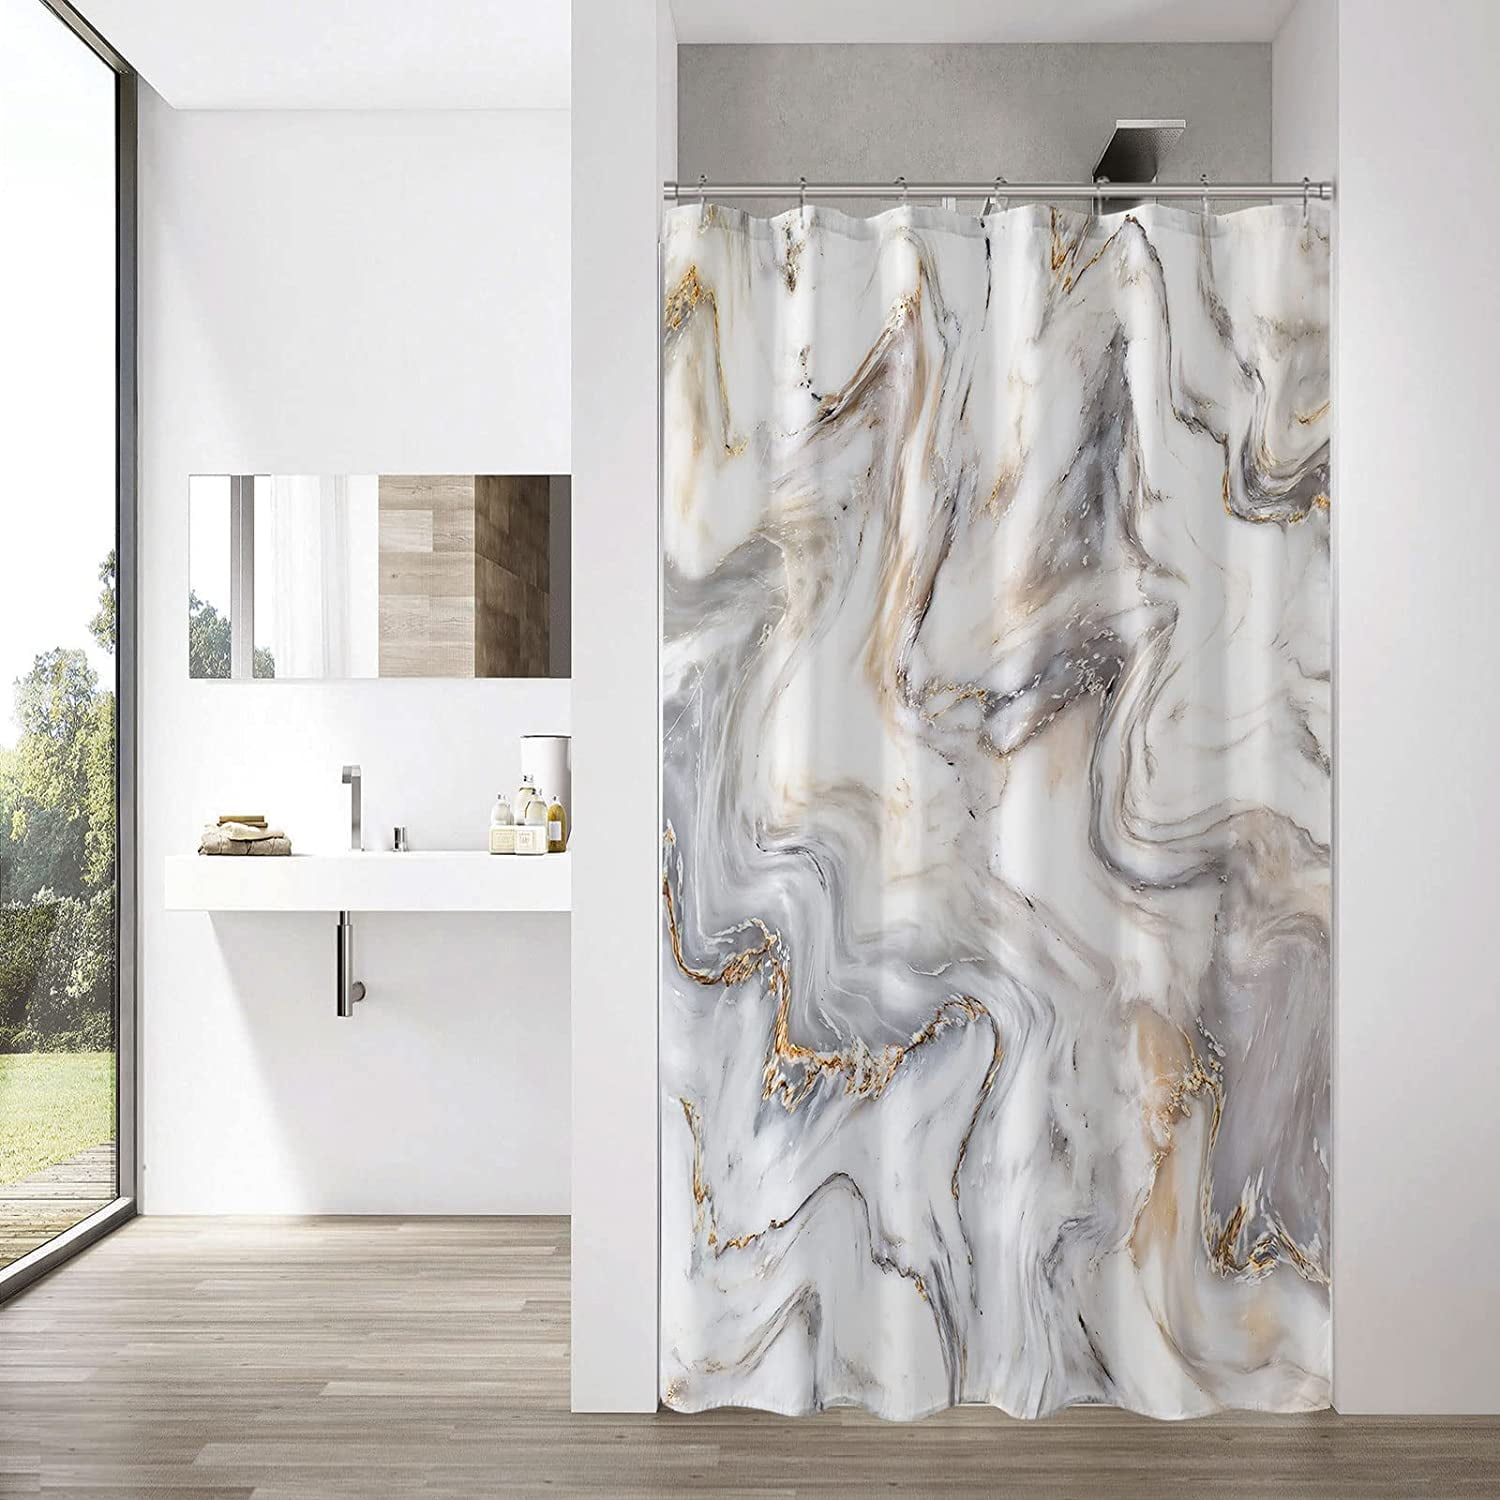 Abstract Marble Waterproof Fabric Shower Curtain Set Bathroom Accessory 12 Hooks 